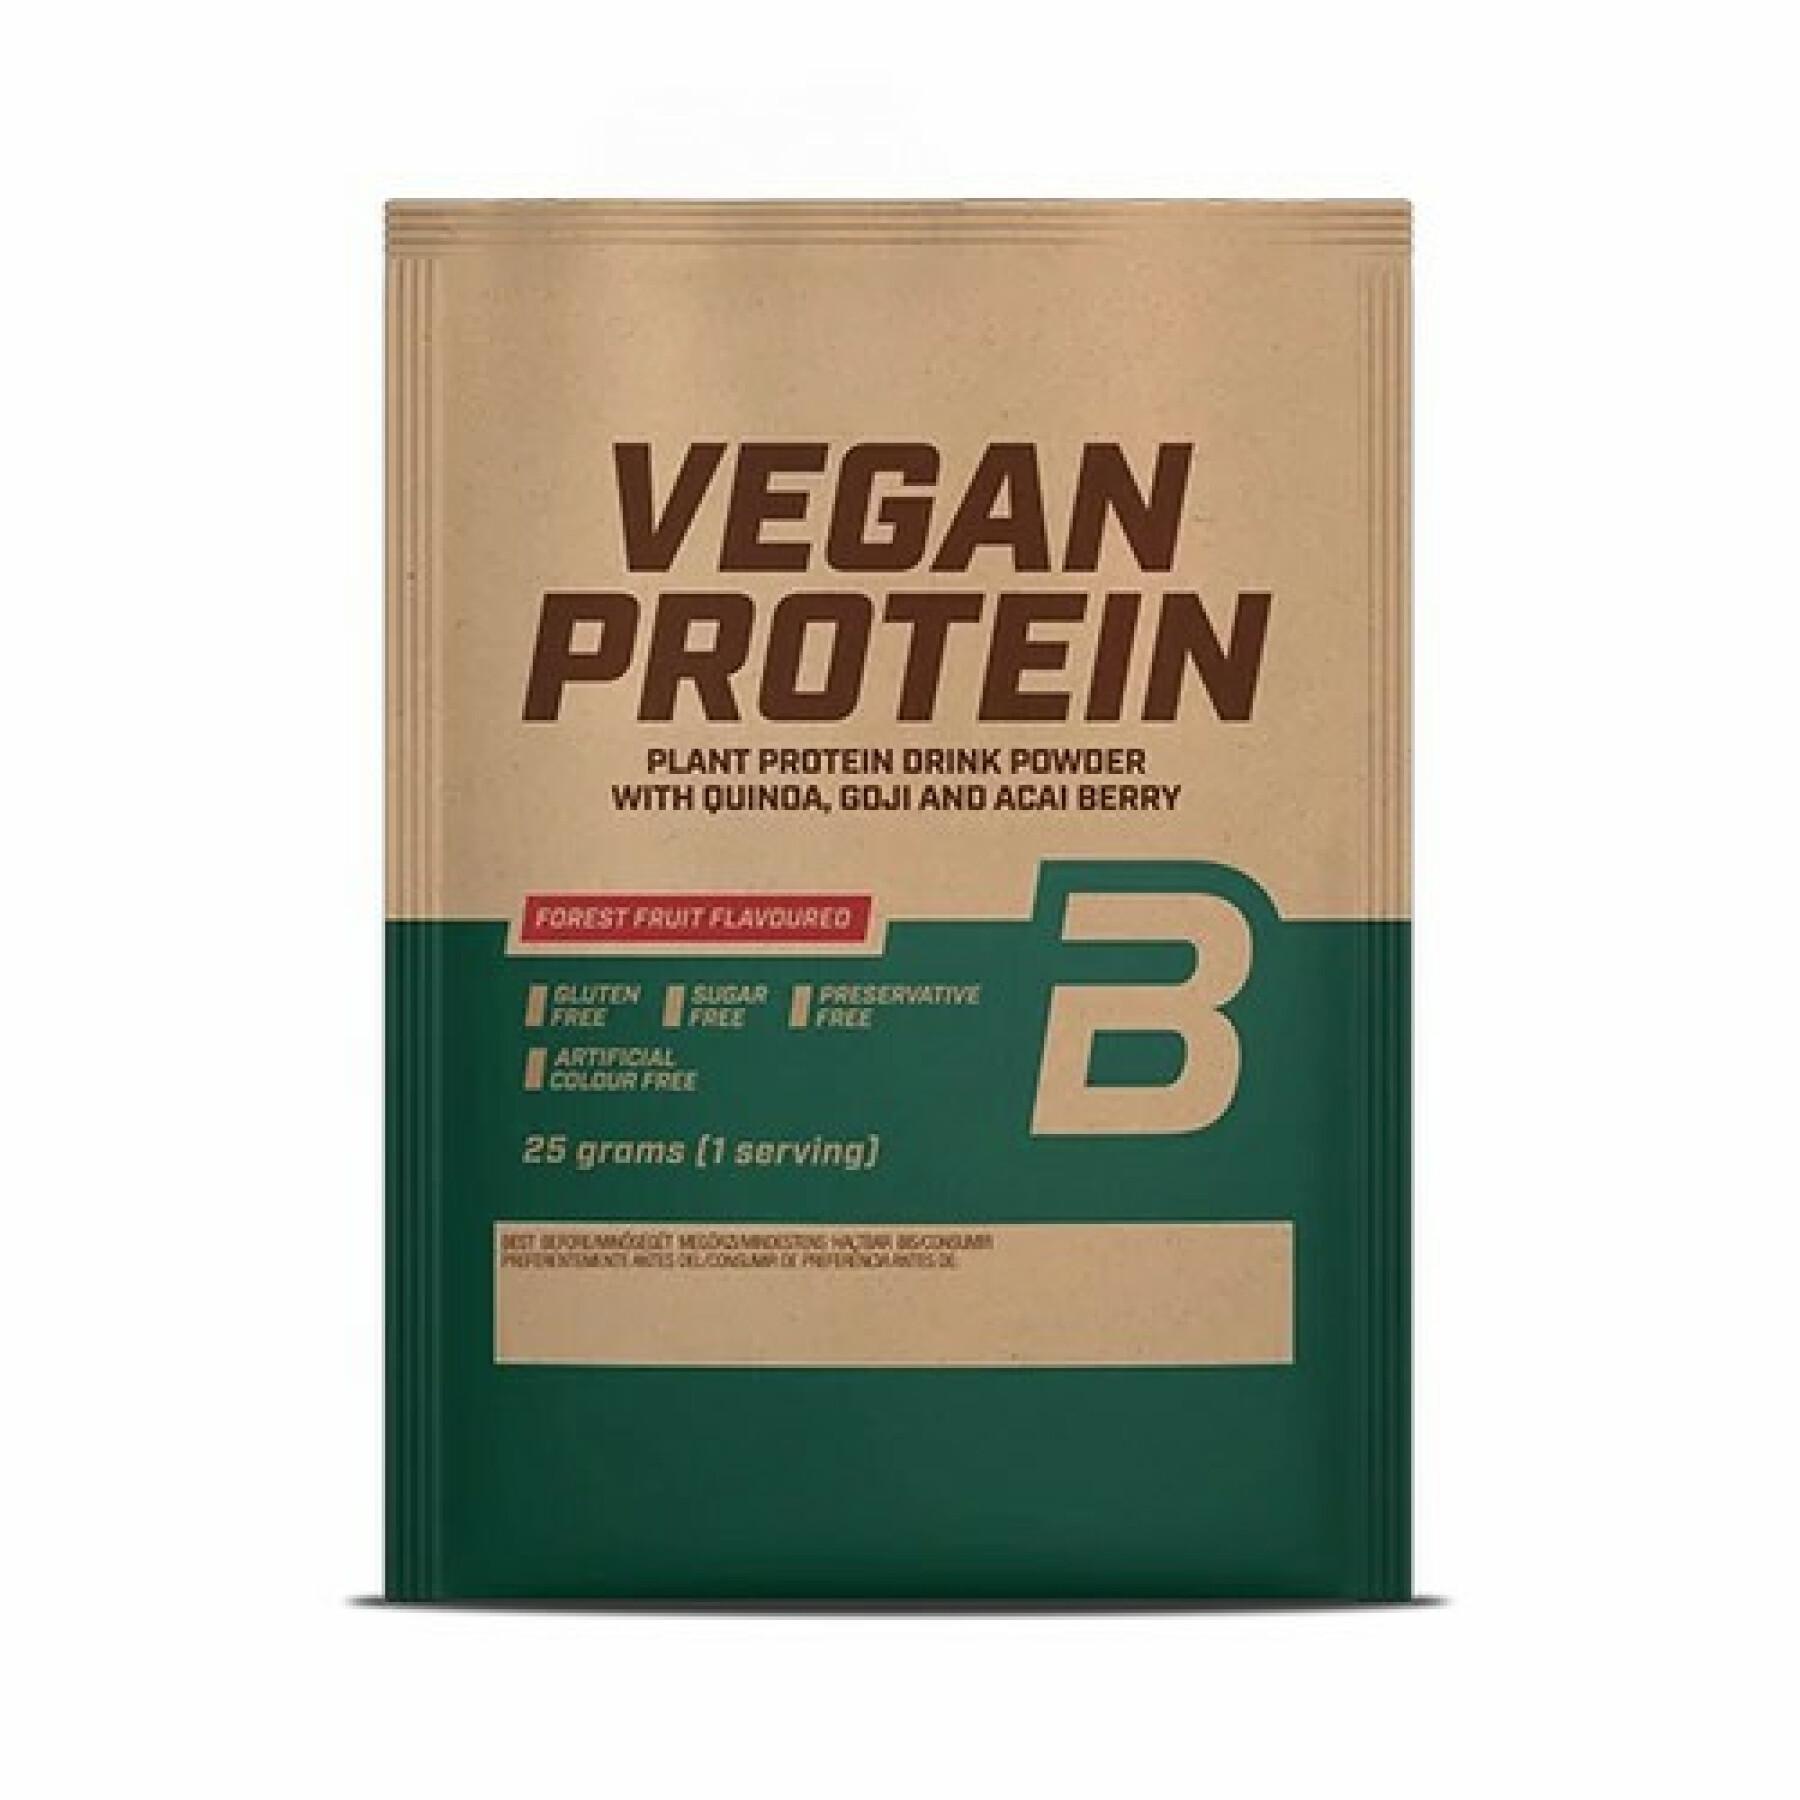 50 packets of vegan protein Biotech USA - Fruits des bois - 25g